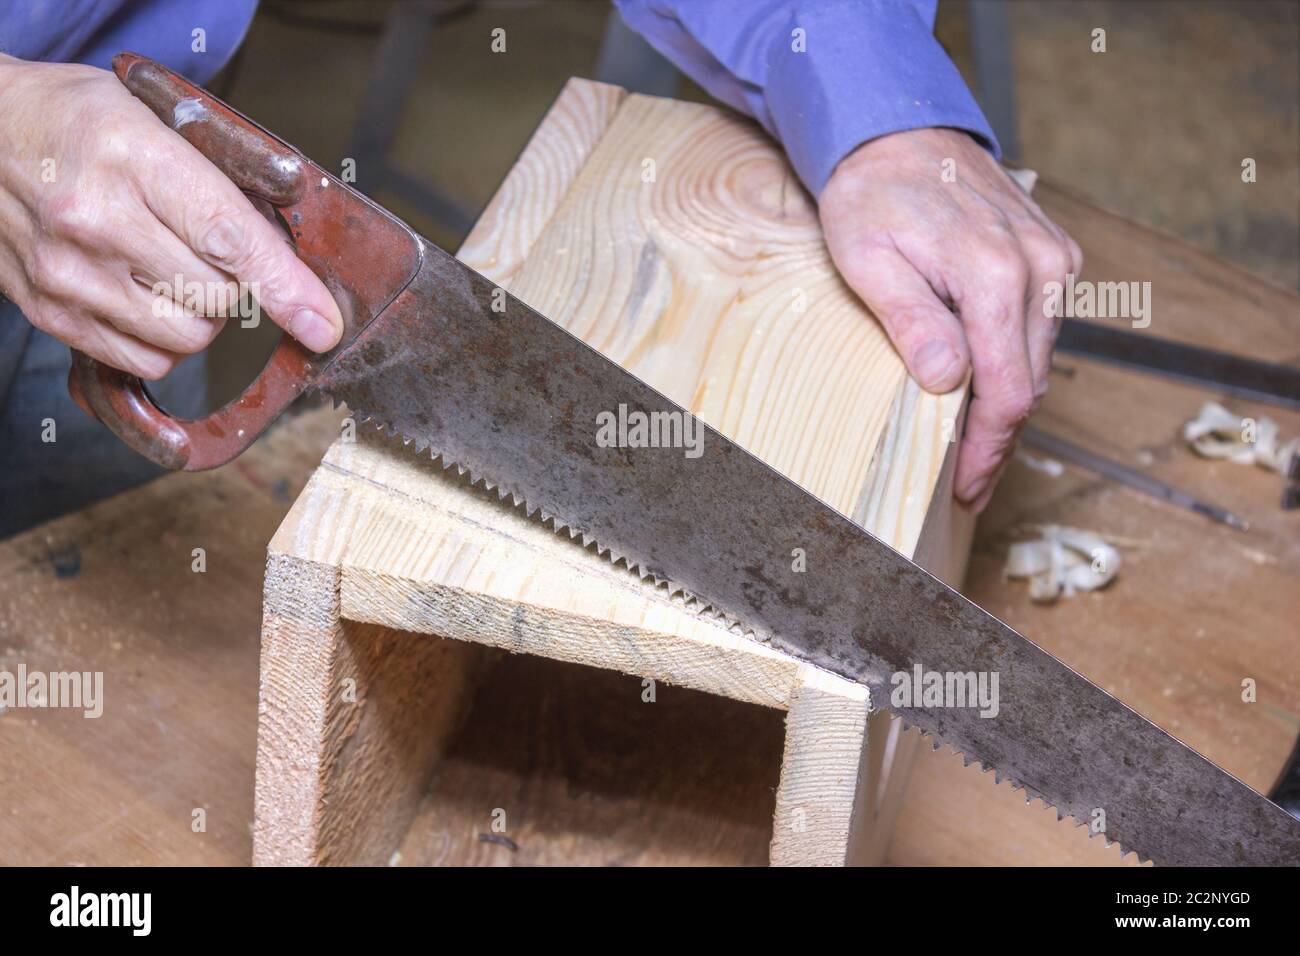 Work on the manufacture of the birdhouse Stock Photo